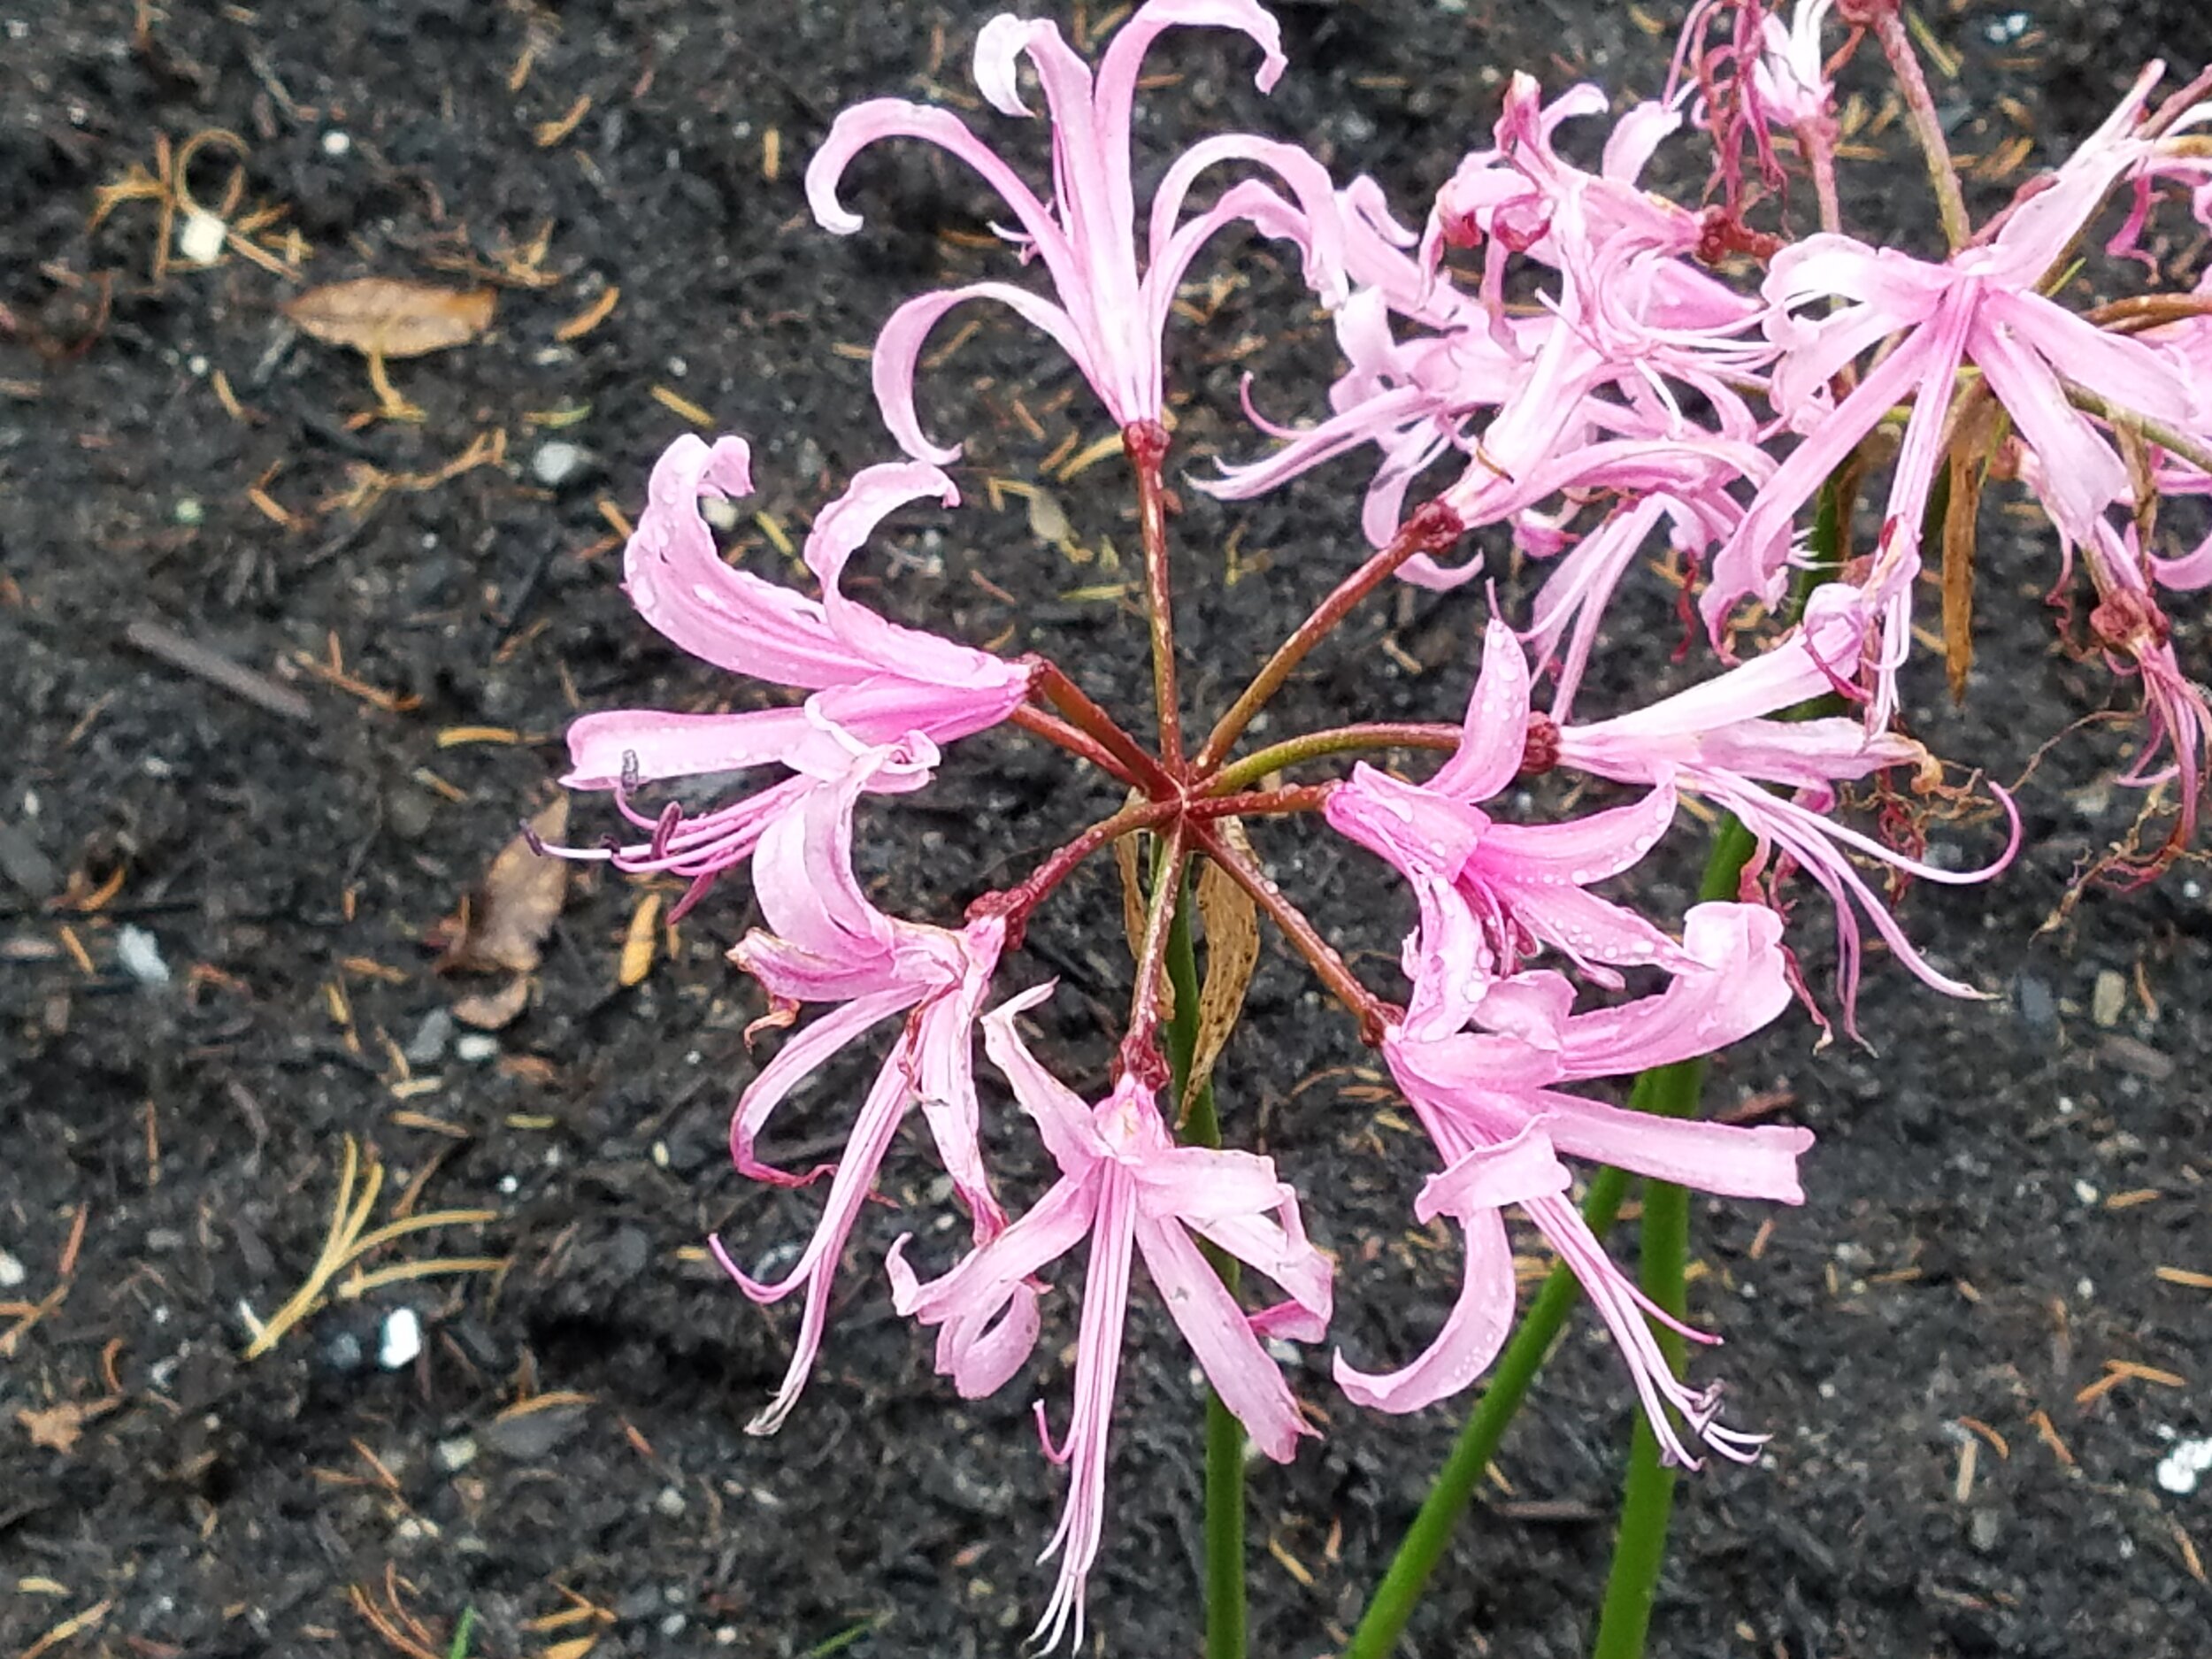  Nerine bowdenii or the Nerine Lily has also been called 'Naked Lady', and provides a touch of pink to the late season garden. 